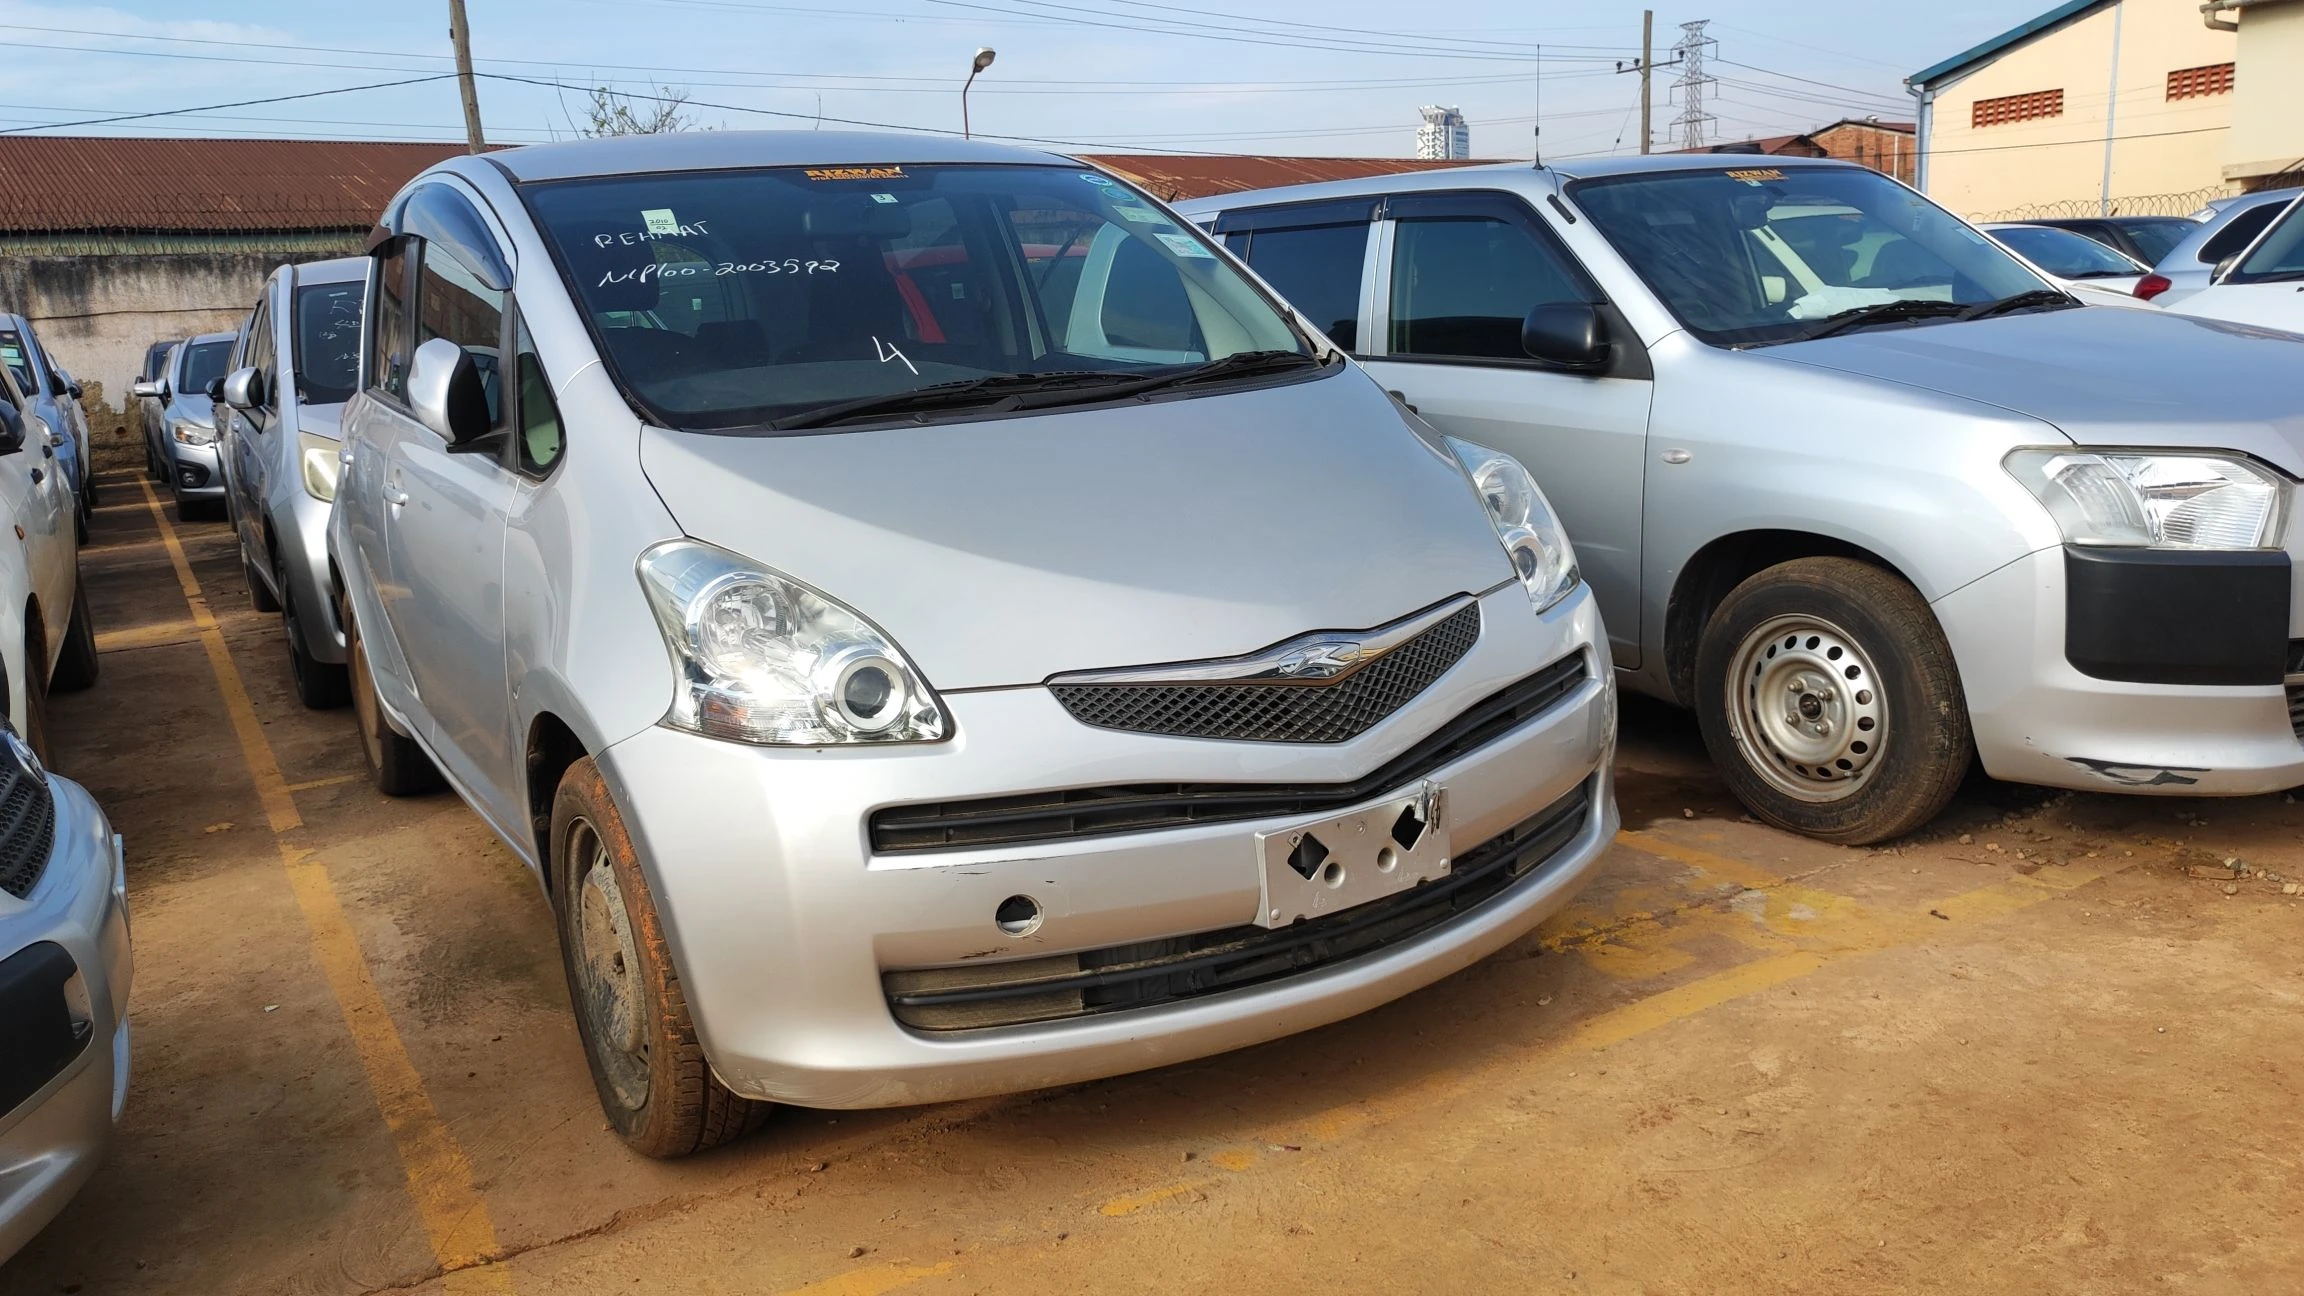 Foreign Used Toyota Ractis 2009 In Kampala. See Car Prices, Images